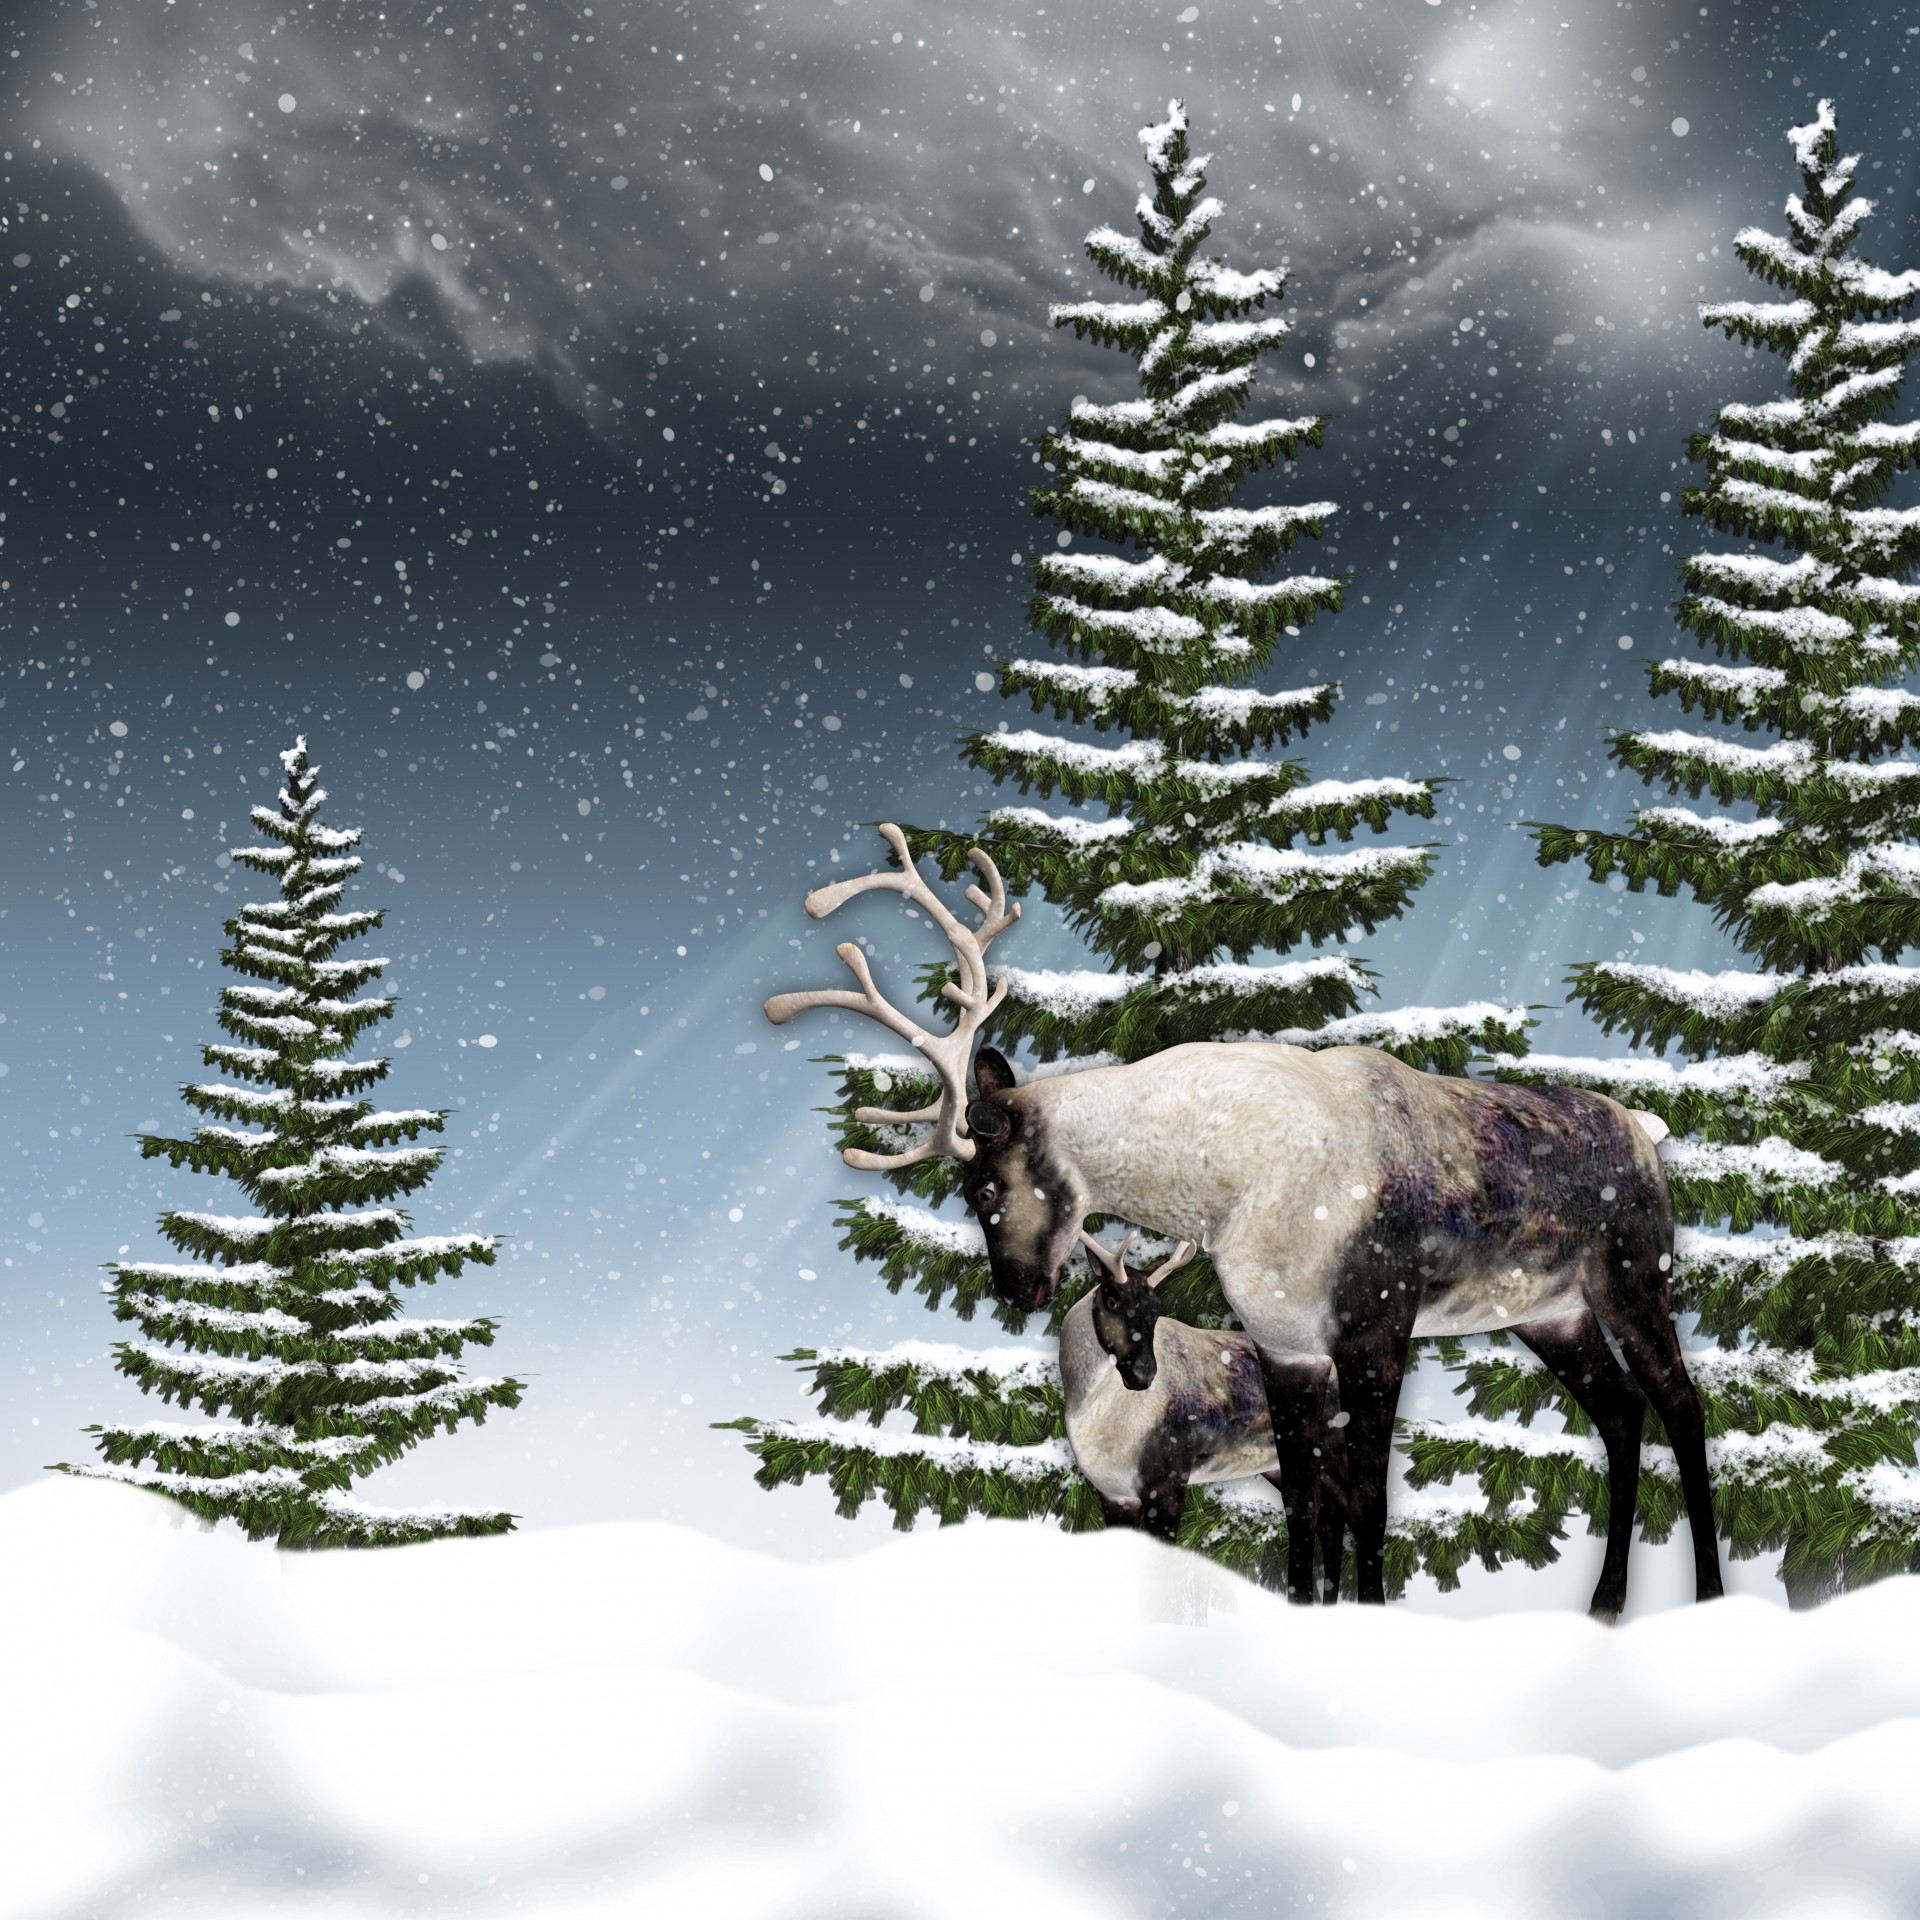 reindeer calf background great for websites holiday cards free photo